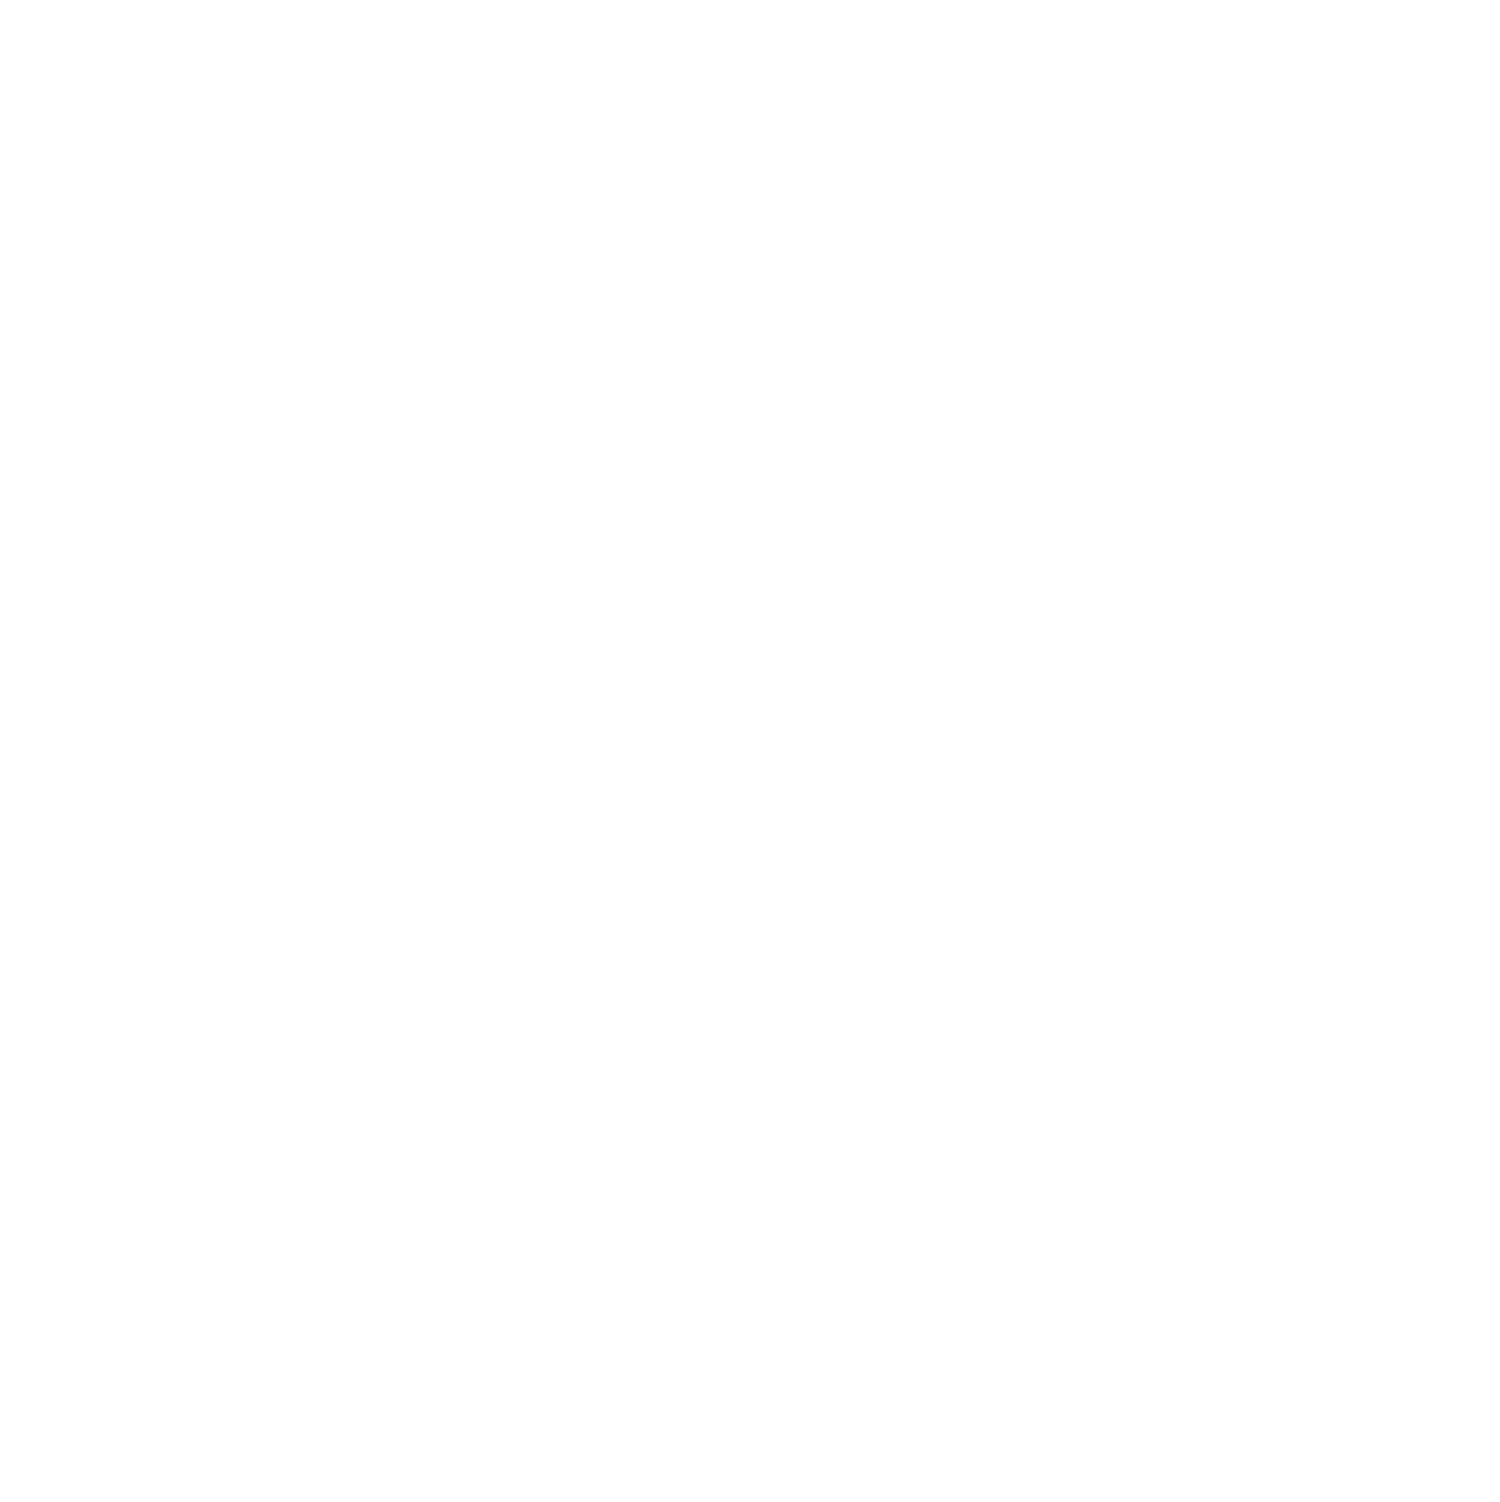 national-science-foundation-logo-png-5.png